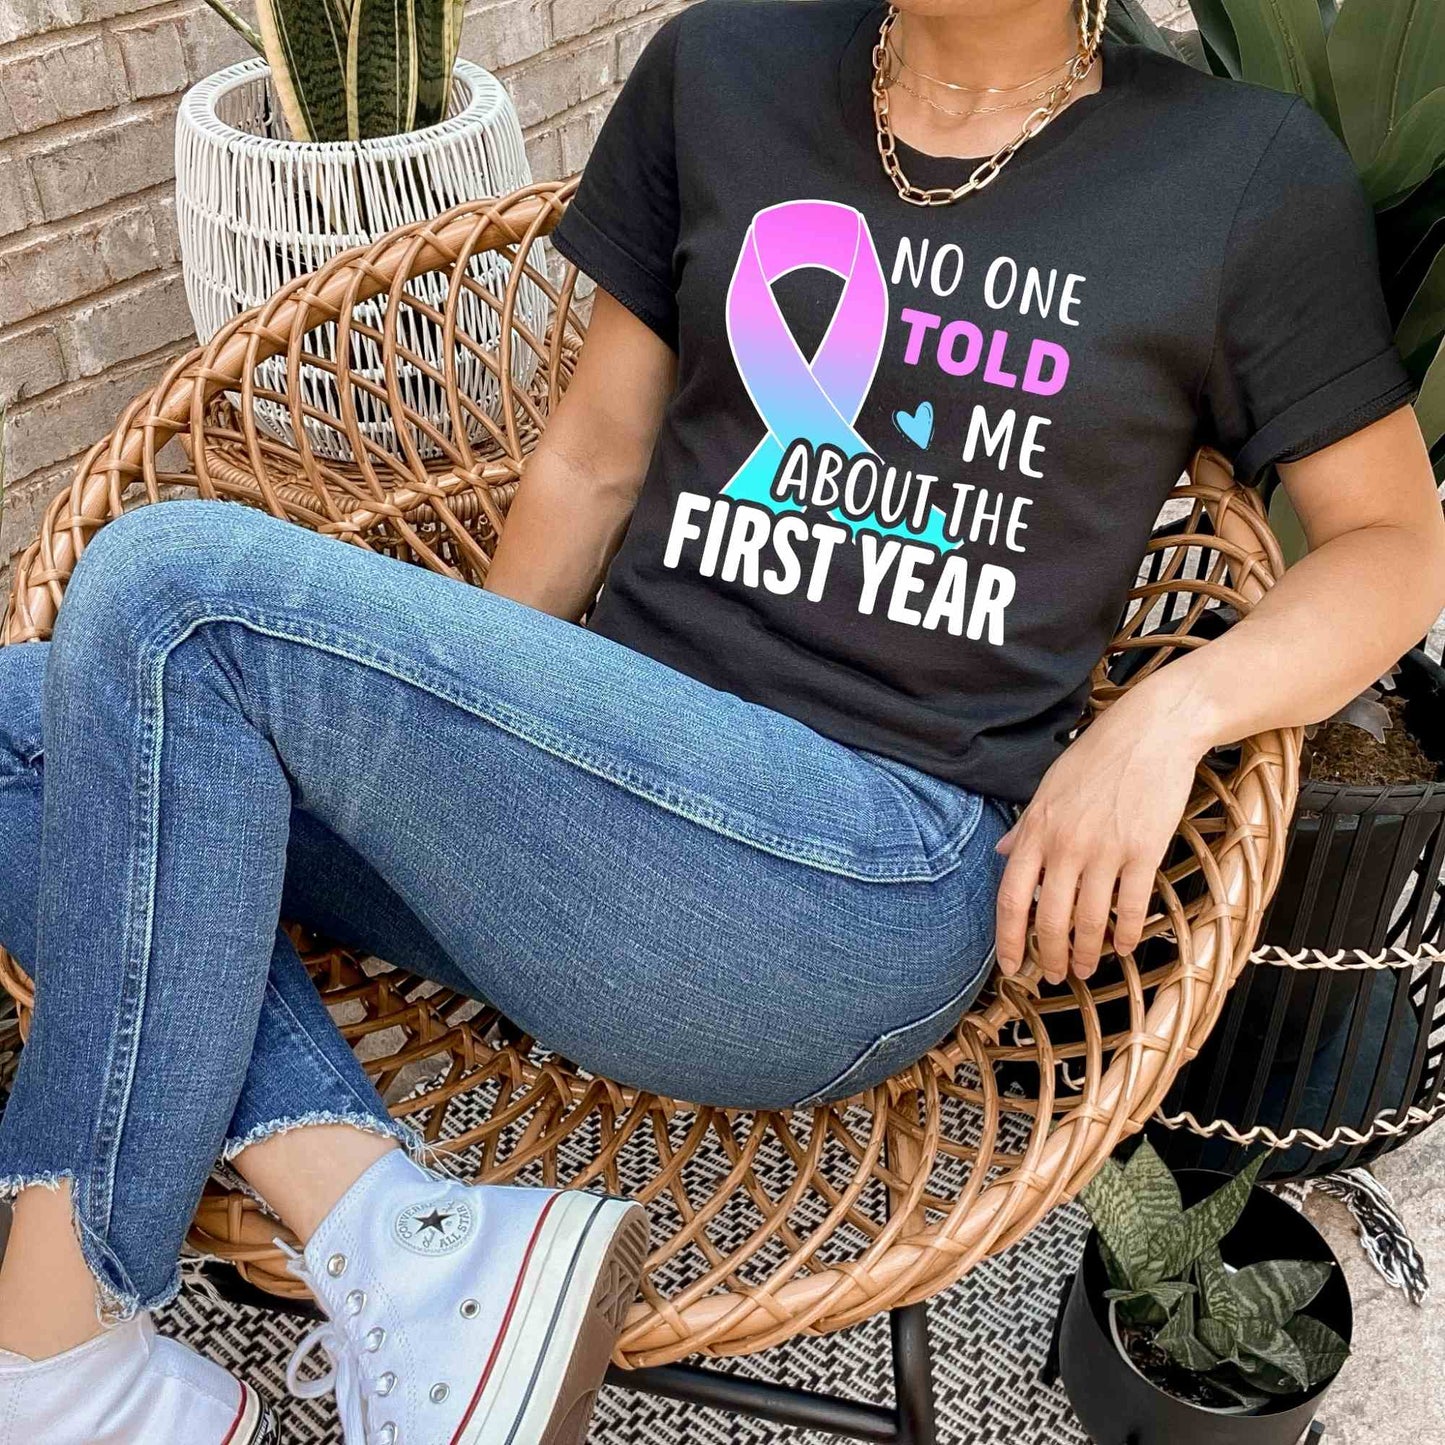 Thyroid Cancer Shirts: Show Your Support in the Fight Against Thyroid Cancer